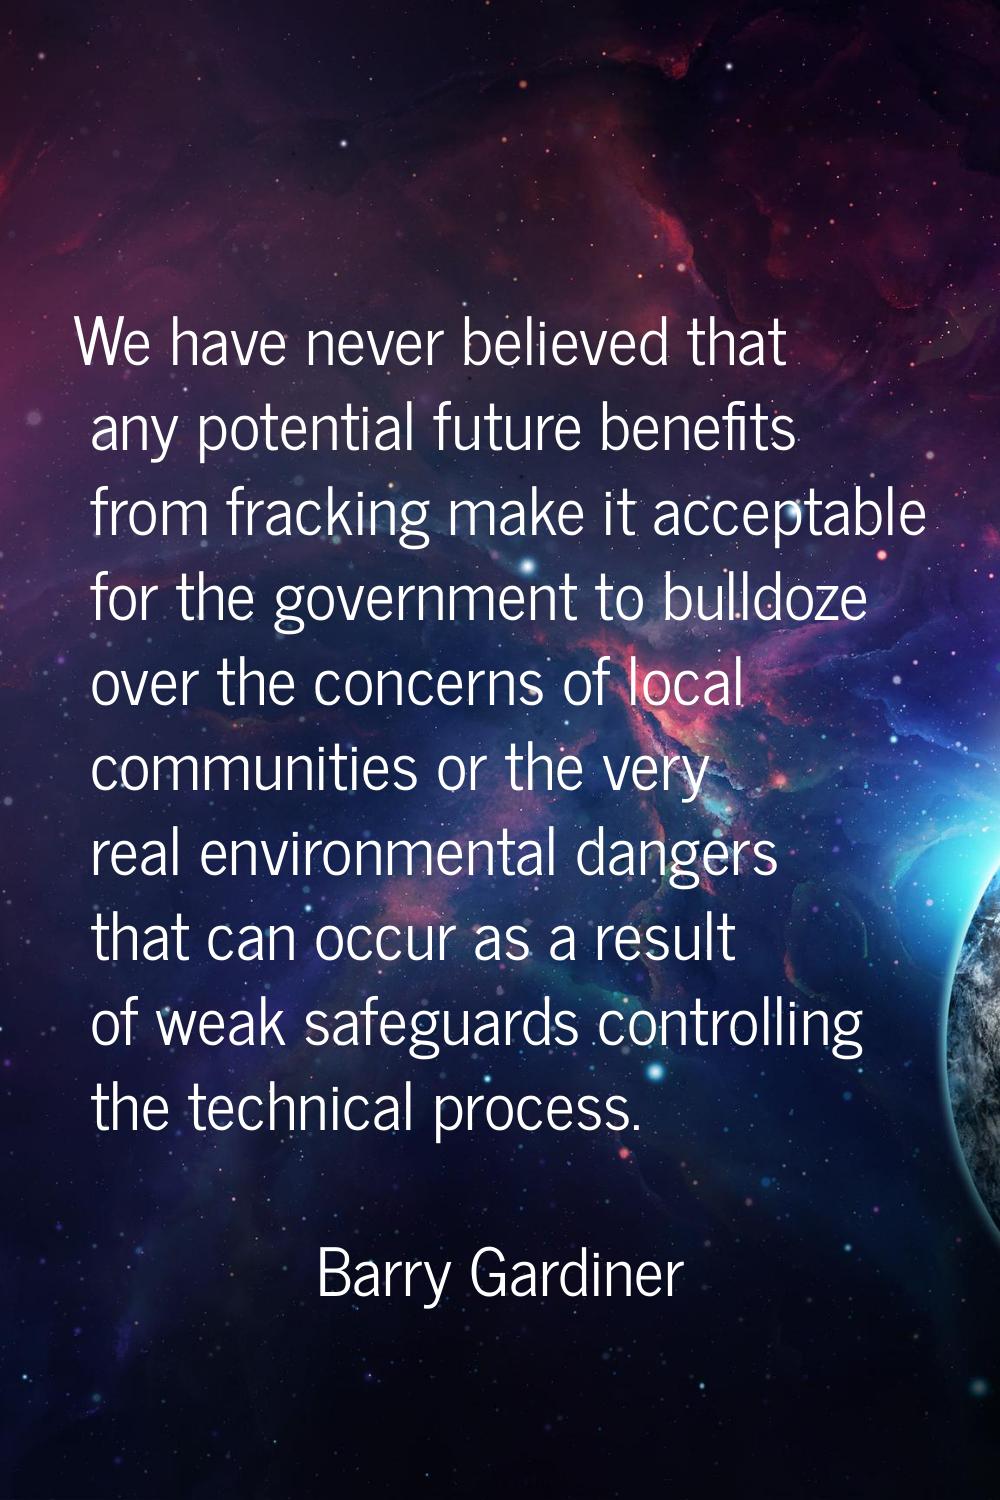 We have never believed that any potential future benefits from fracking make it acceptable for the 